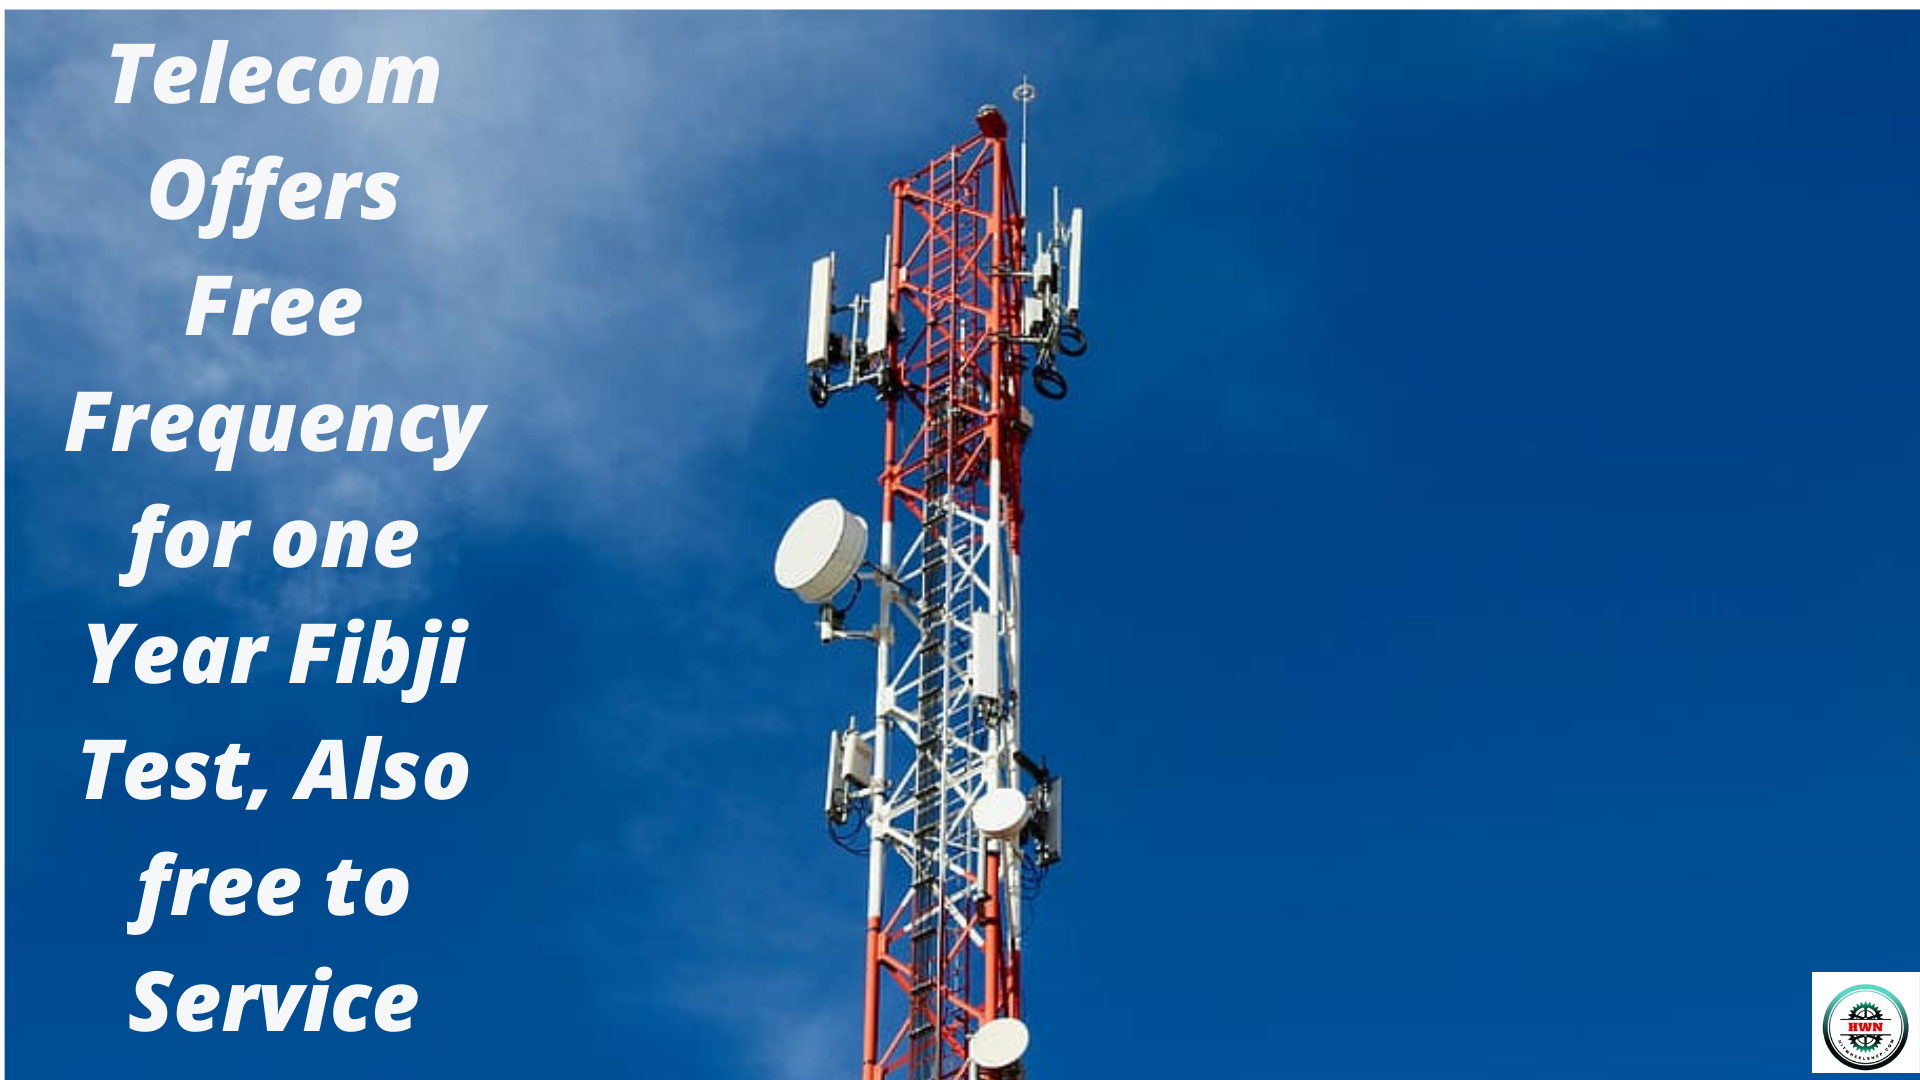 Telecom Offers Free Frequency for one Year Fibji Test, Also free to Service